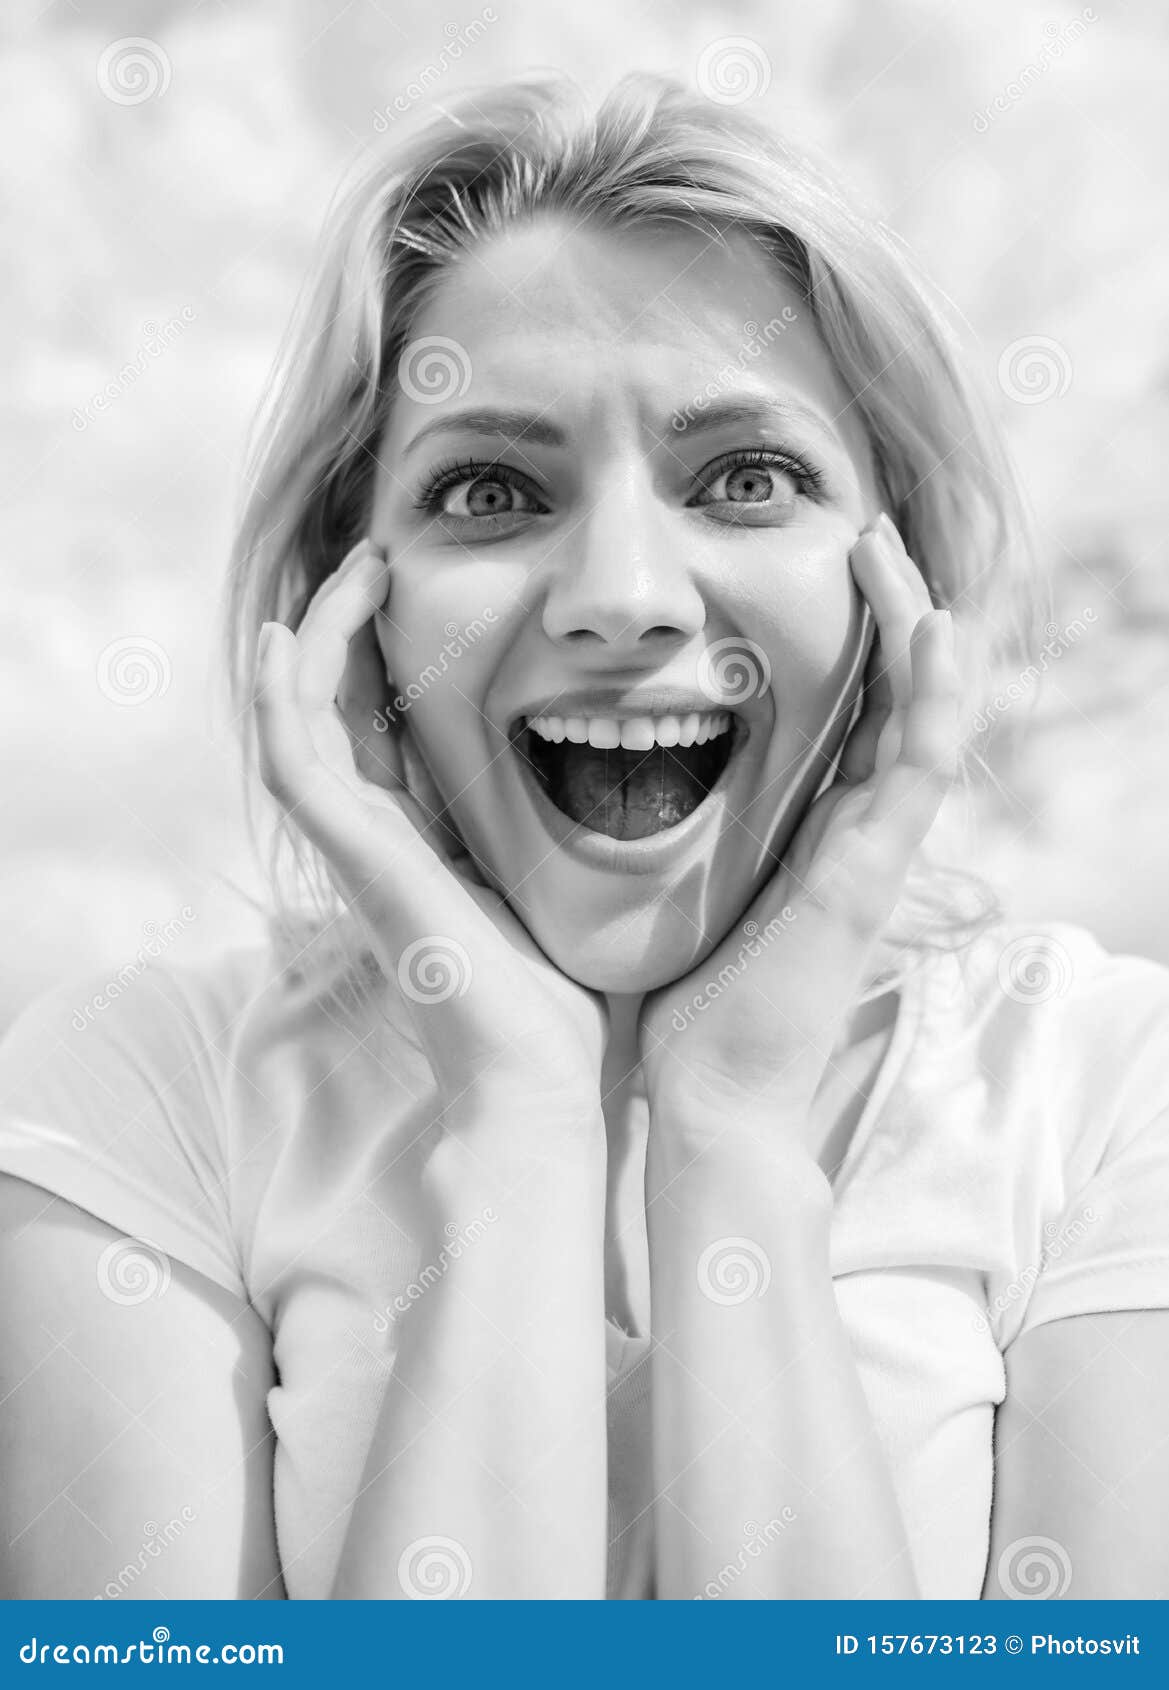 Positive Human Emotions Face Expression Feeling Life Perception Stock Image Image Of